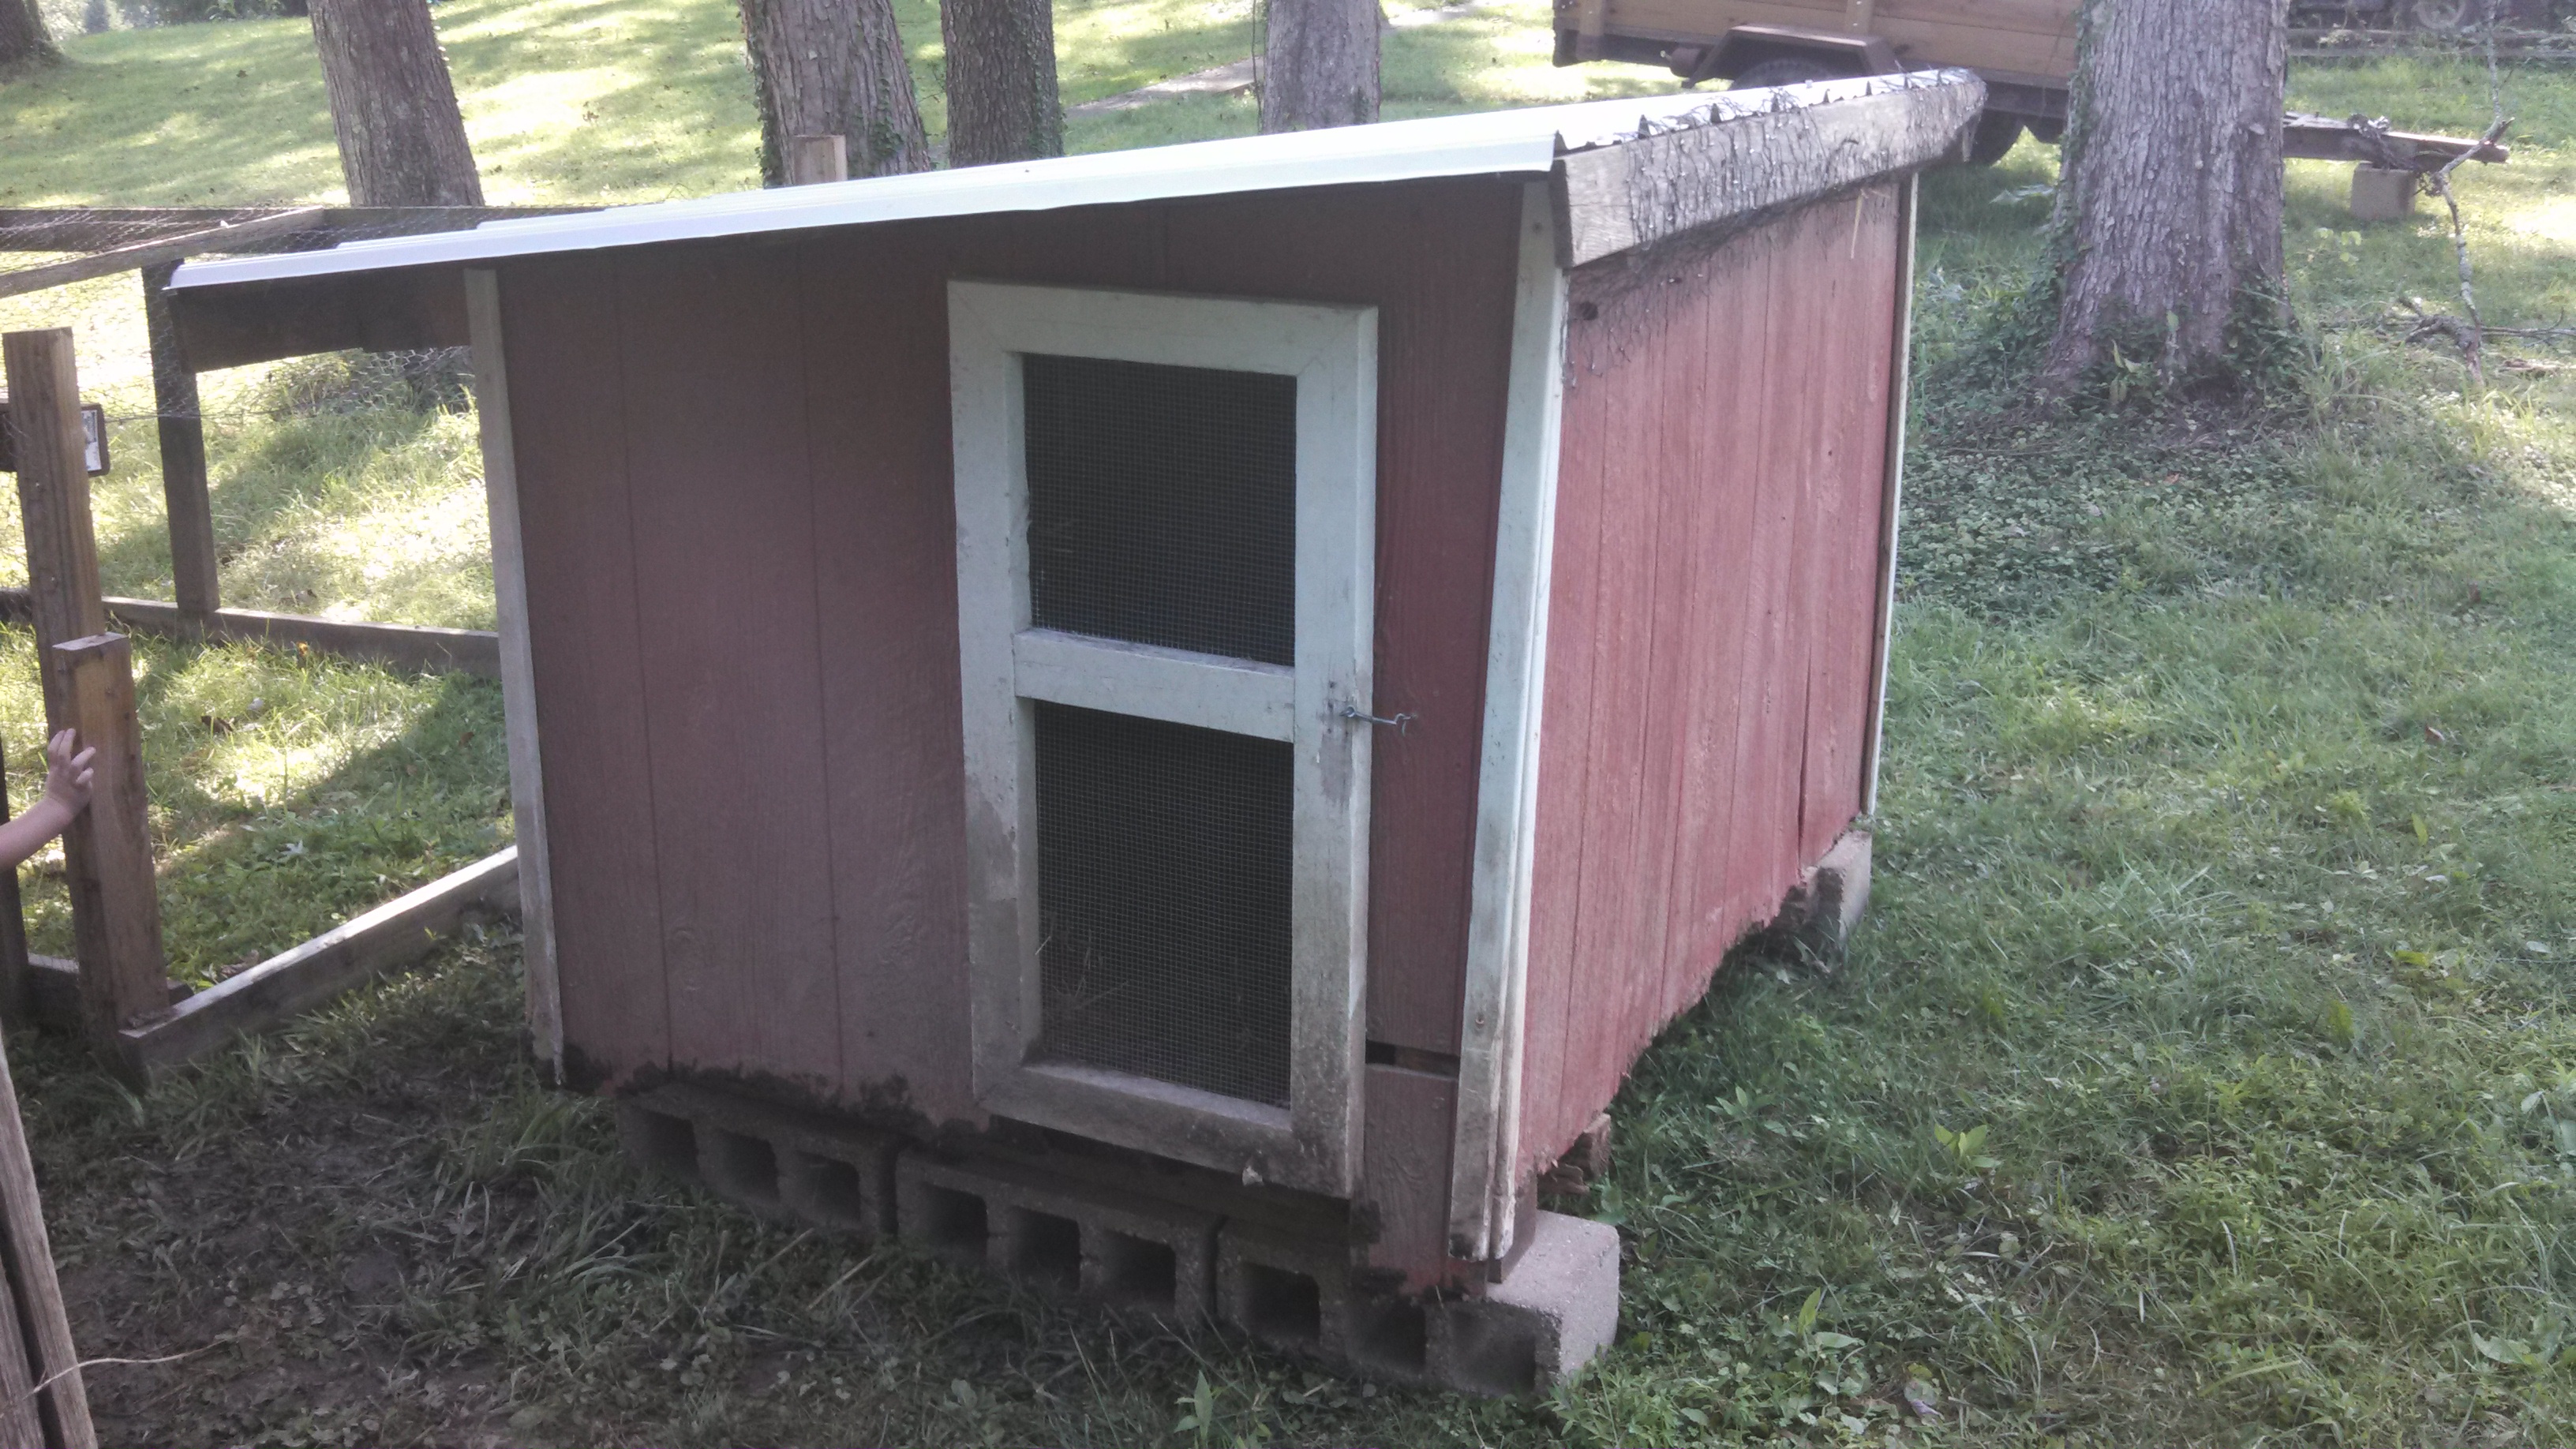 This is the coop I am currently working on setting up. I got it from someone who was moving and giving it away. Would like go have some chicks in it in the spring. I have a 10 ft long enclosed fun to still attach but it is coming along!